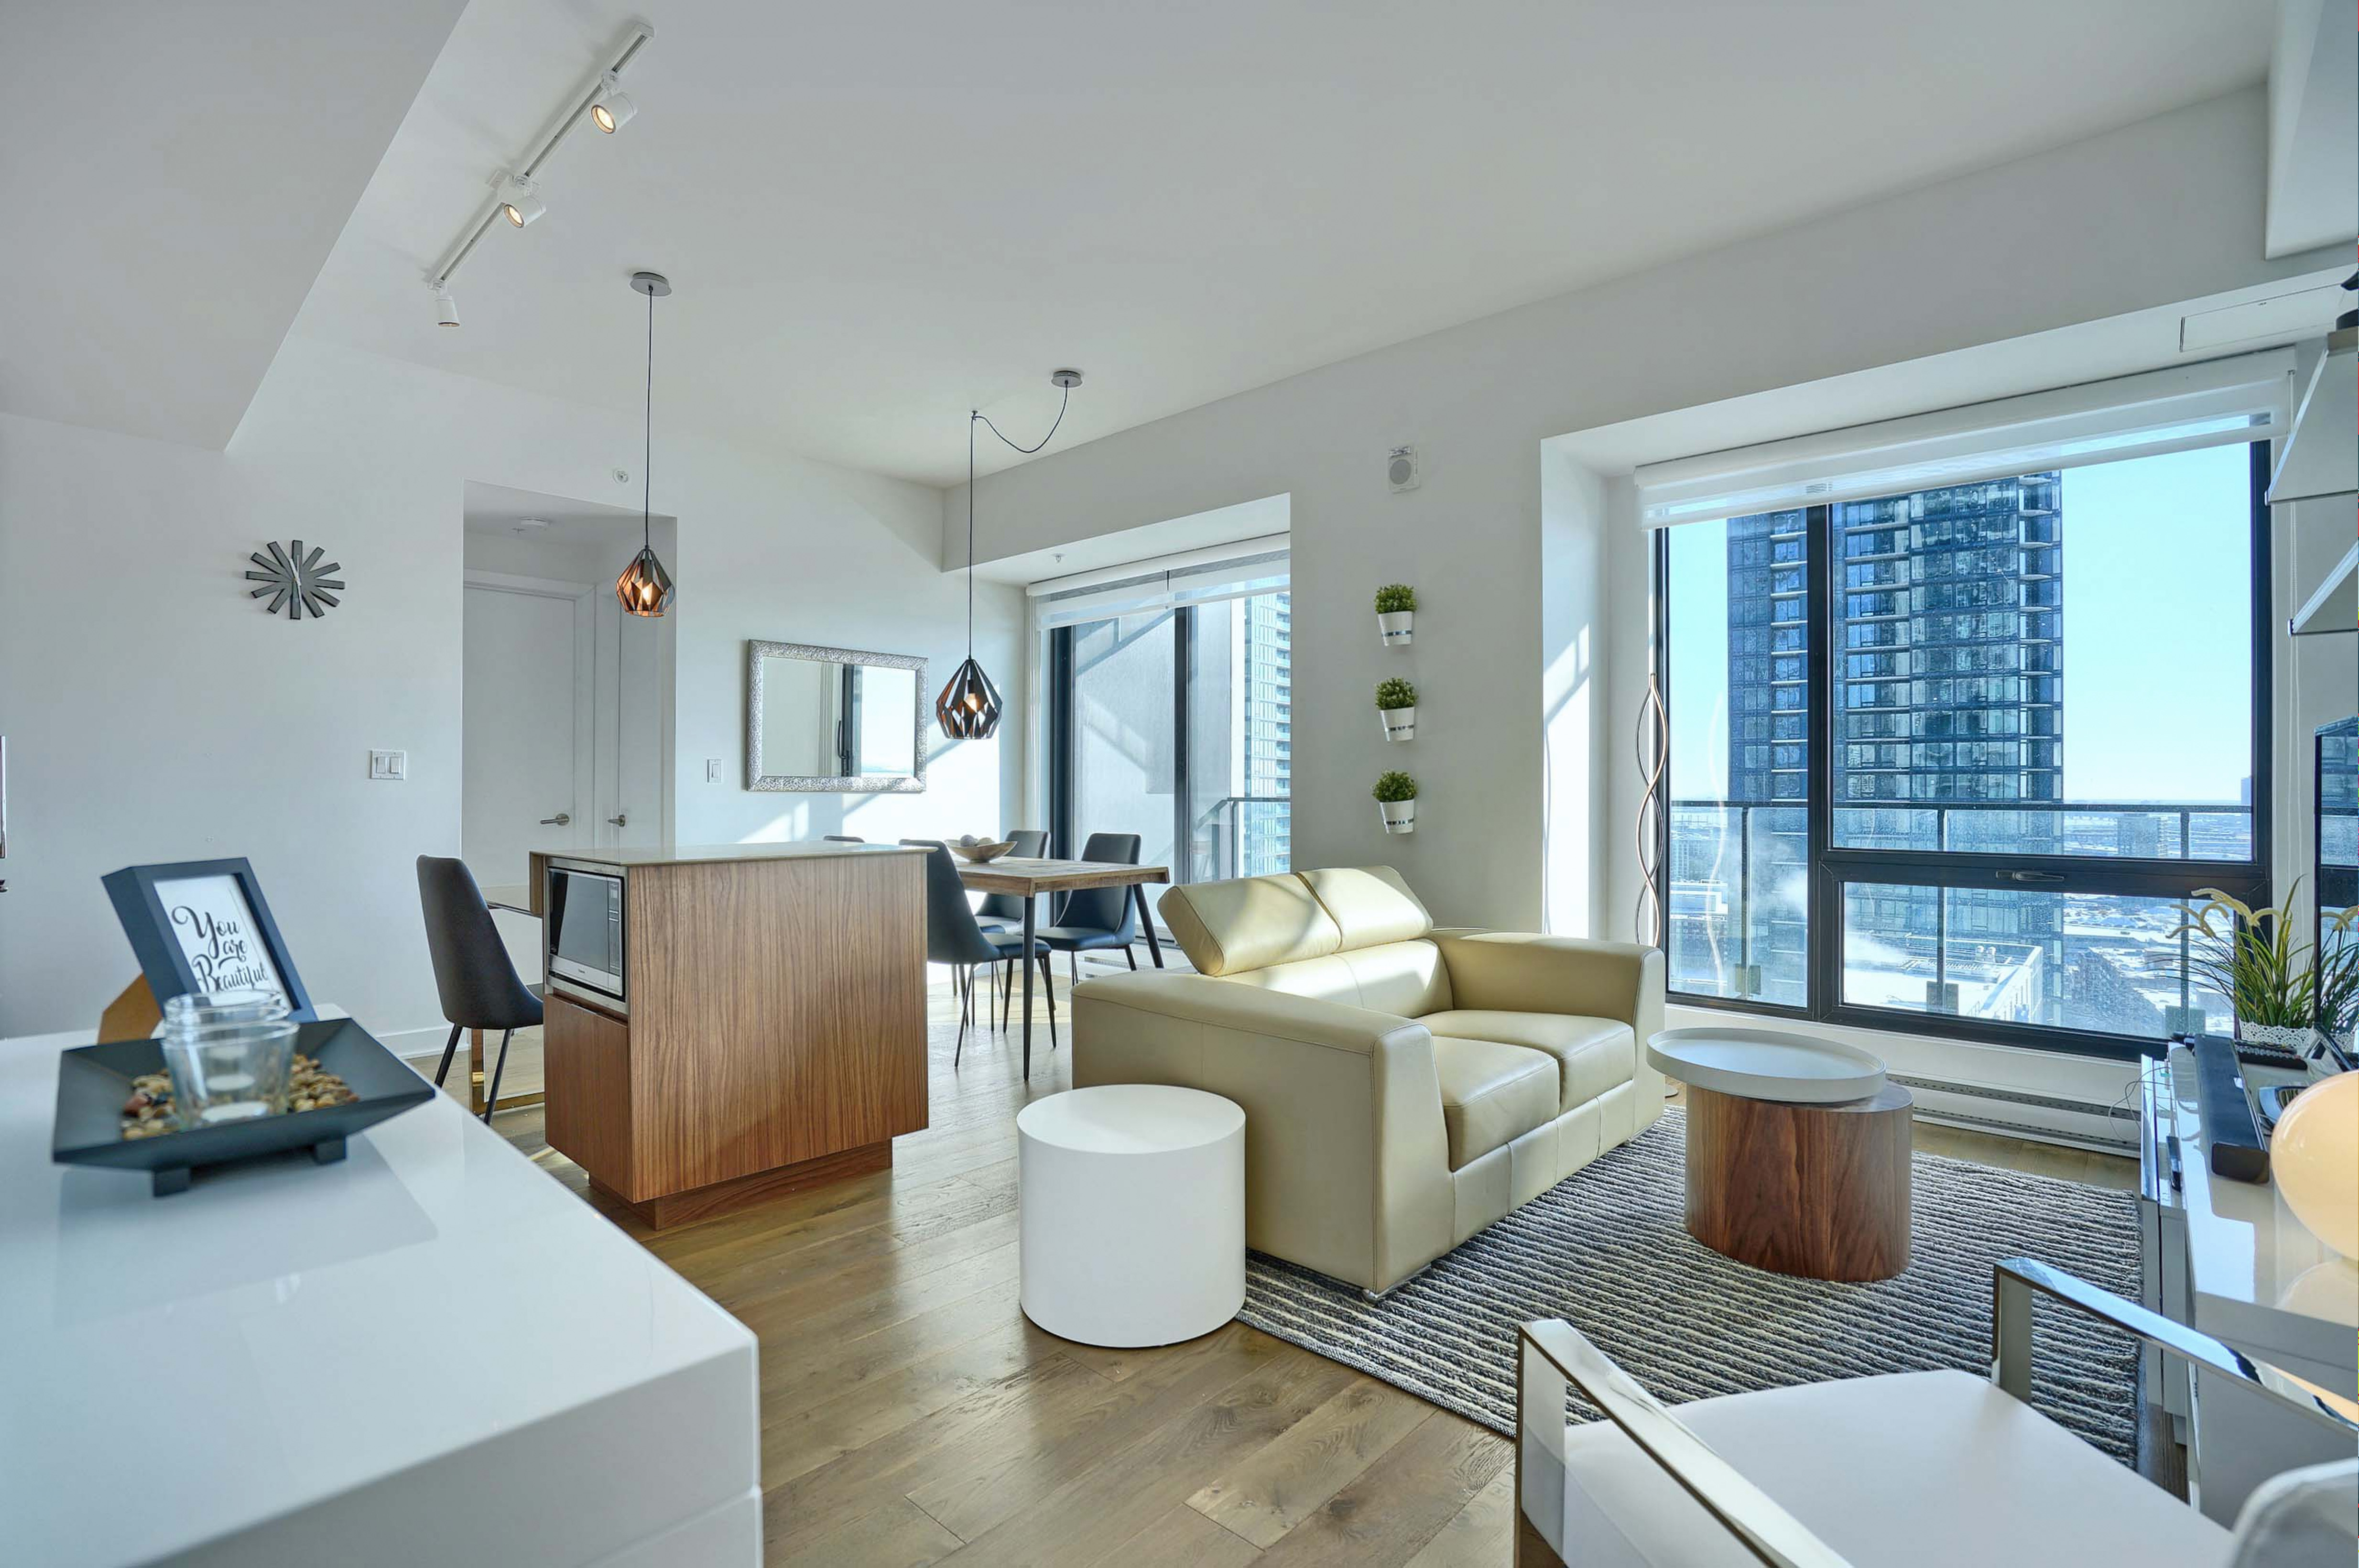 View of the main living and dining areas of this furnished suite in montreal. Luxury, designer furnishing include a leather couch, unique end tables, dining seating for four with light wood flooring, and white walls. Large floor-to-ceiling windows make this an amazing place to be while in montreal. 